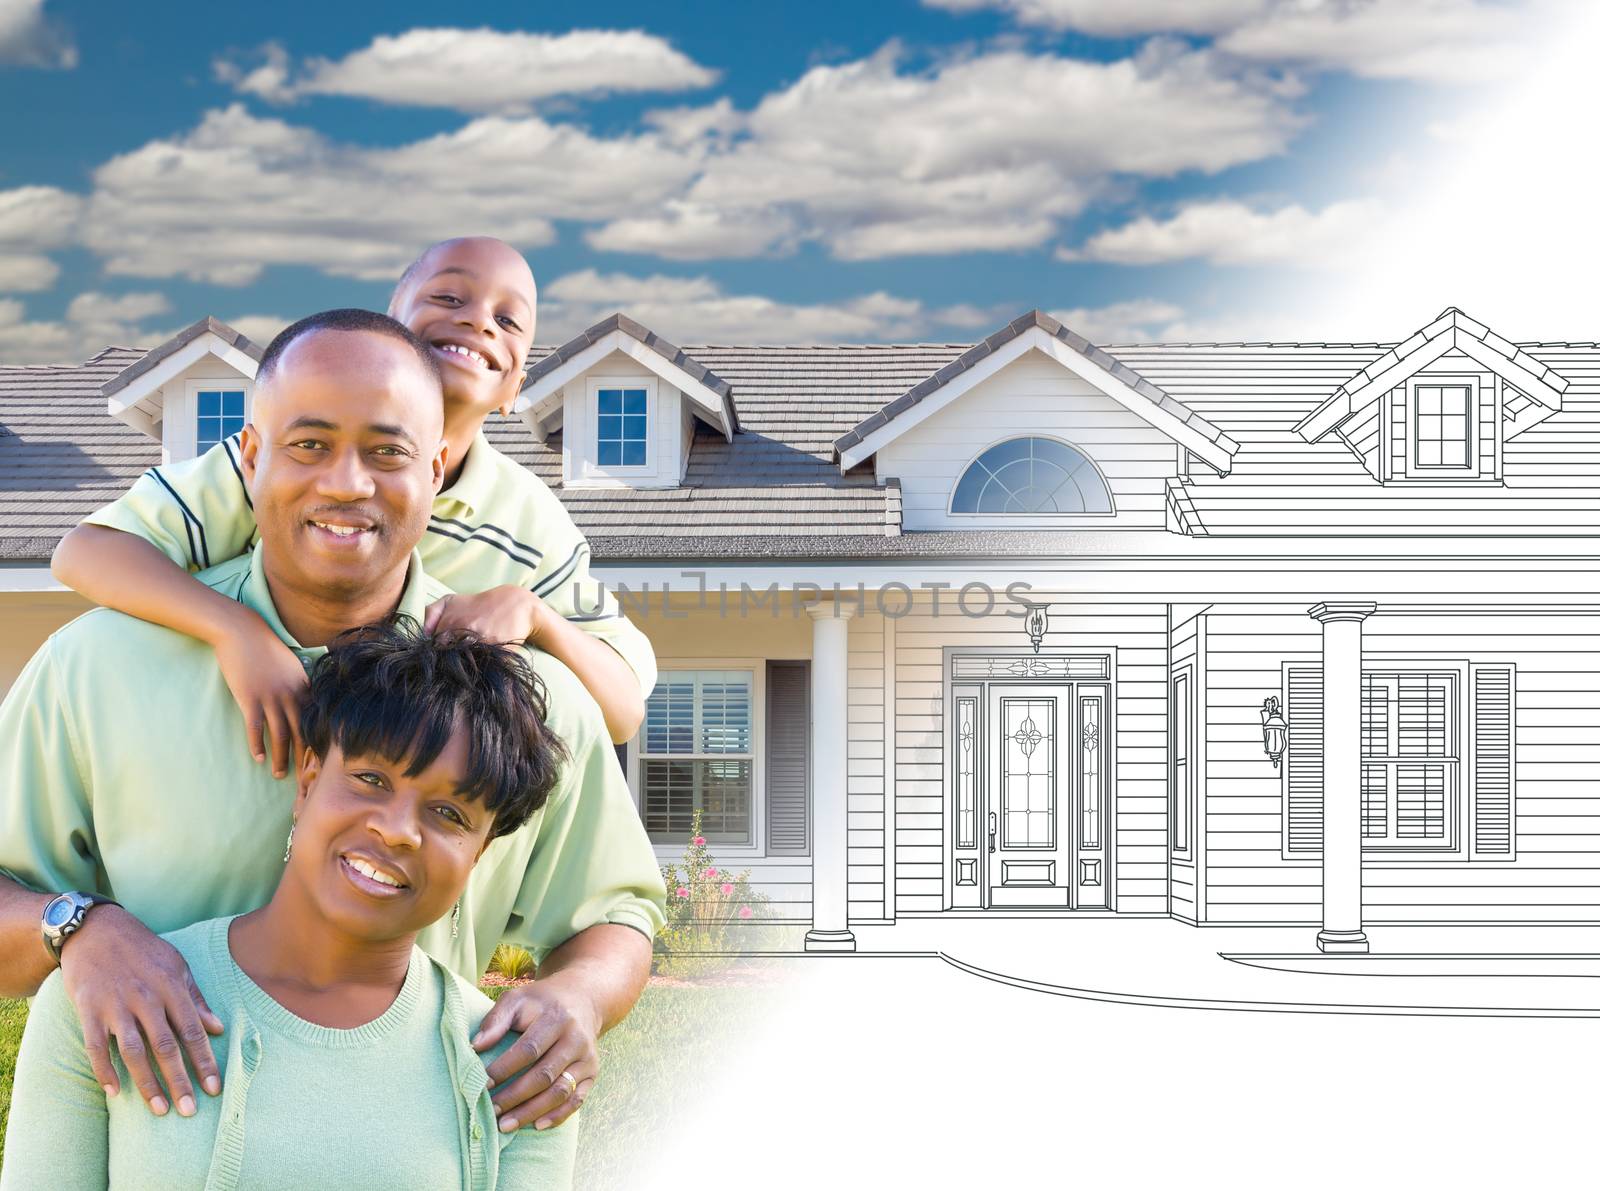 African American Family In Front of Drawing of New House Gradating Into Photograph.